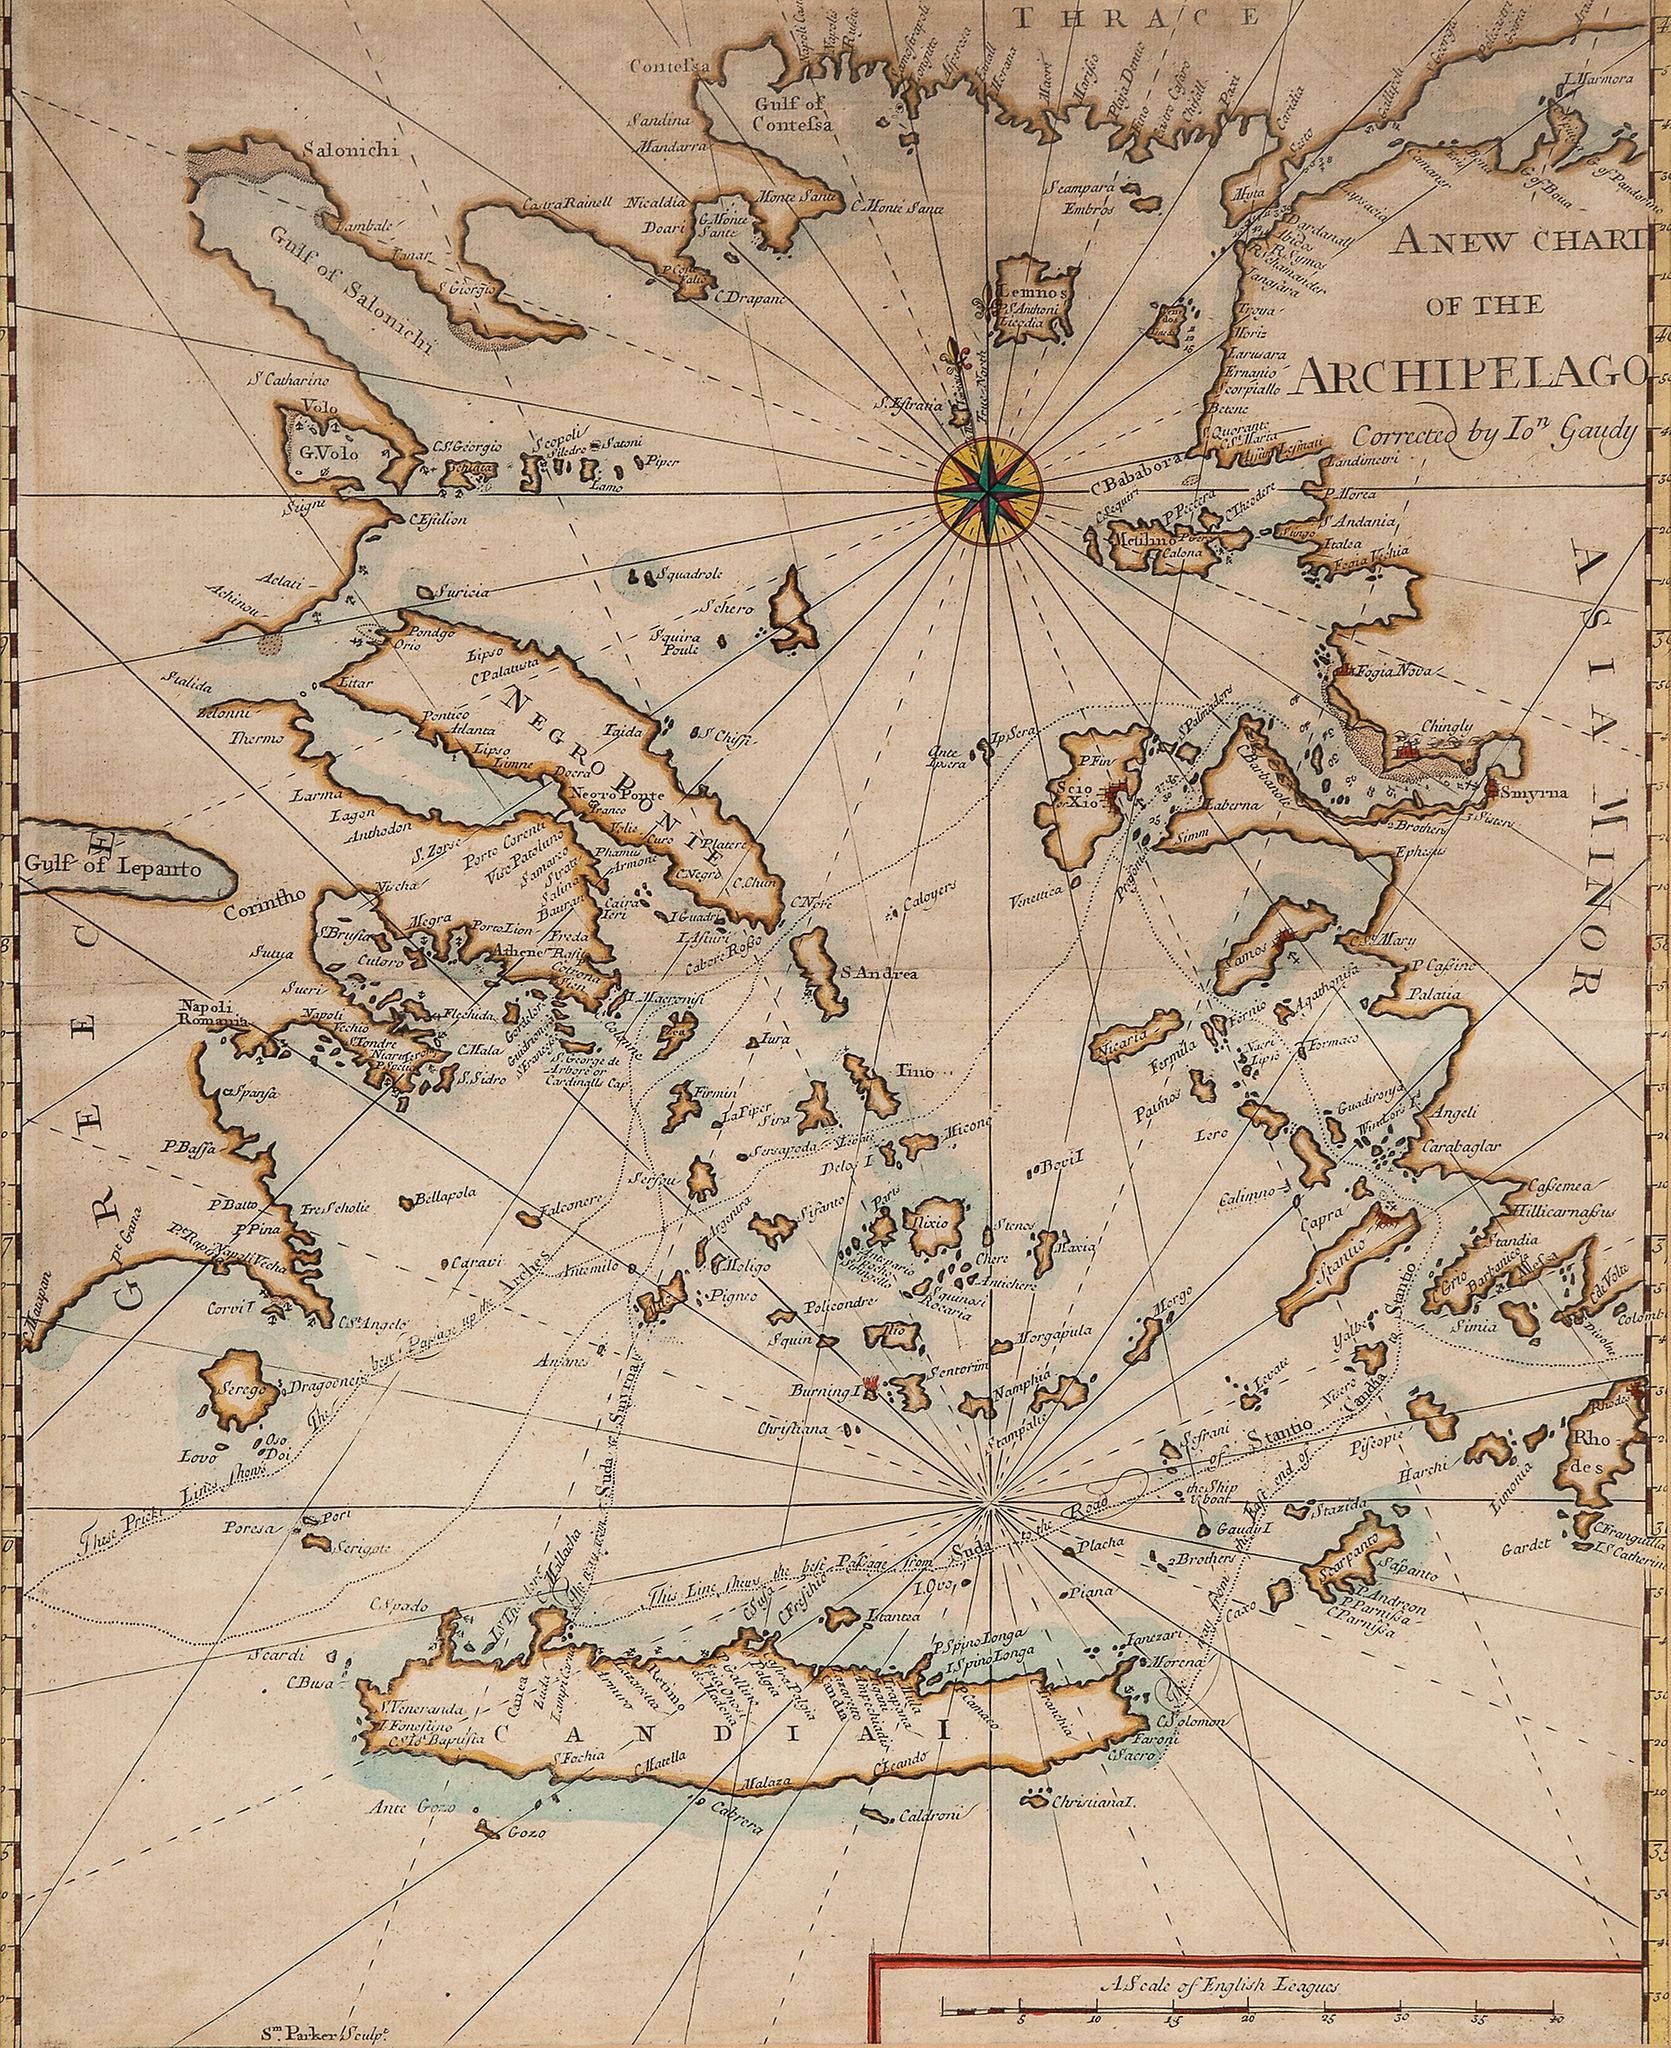 Gaudy (John) - A New Chart of the Archipelago, the Aegean and eastern Mediterranean from the Marmara